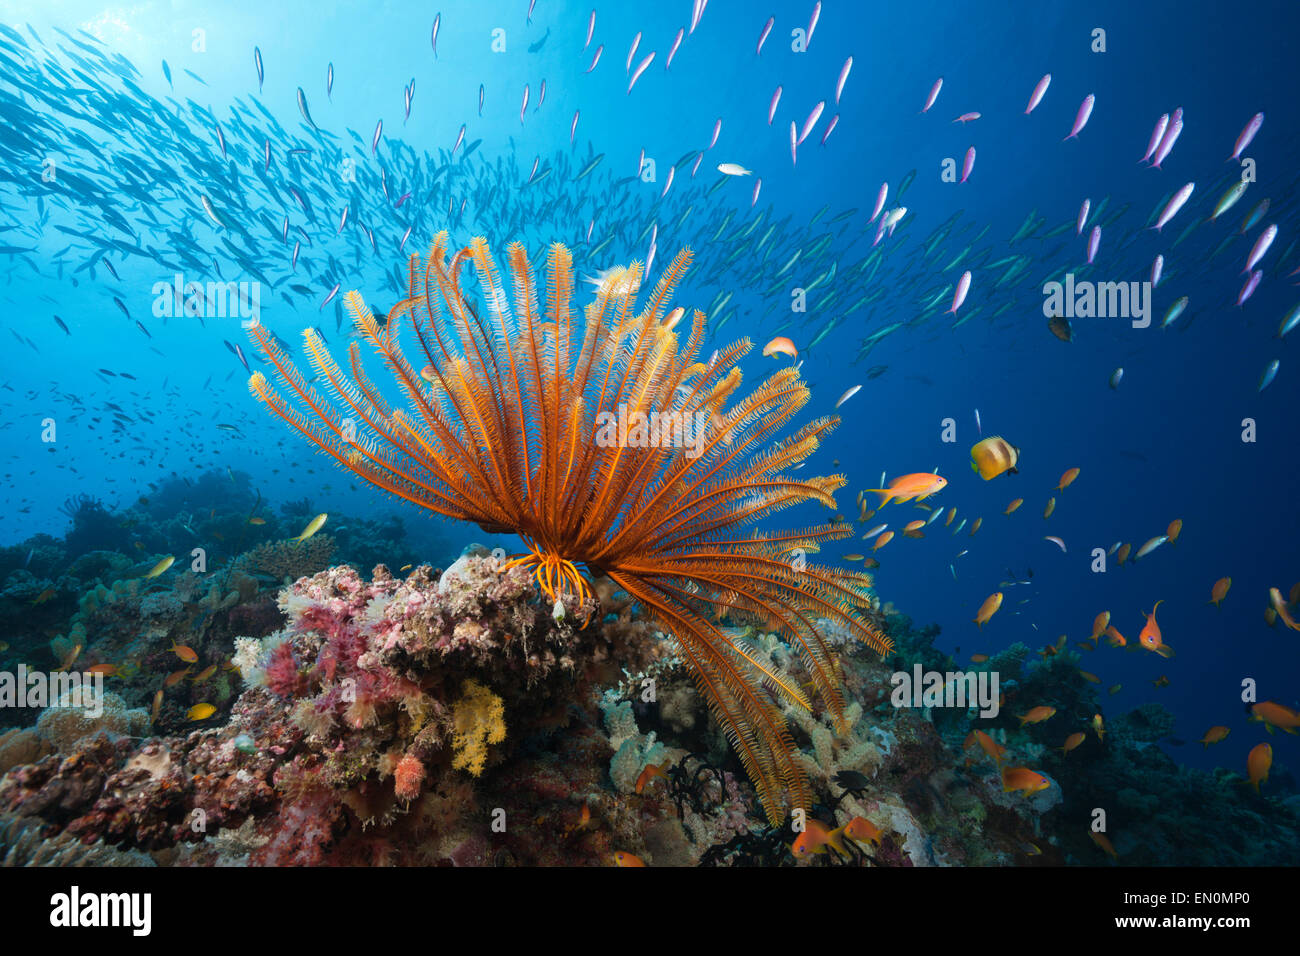 Reef Scene with Crinoid and Fishes, Great Barrier Reef, Australia Stock Photo